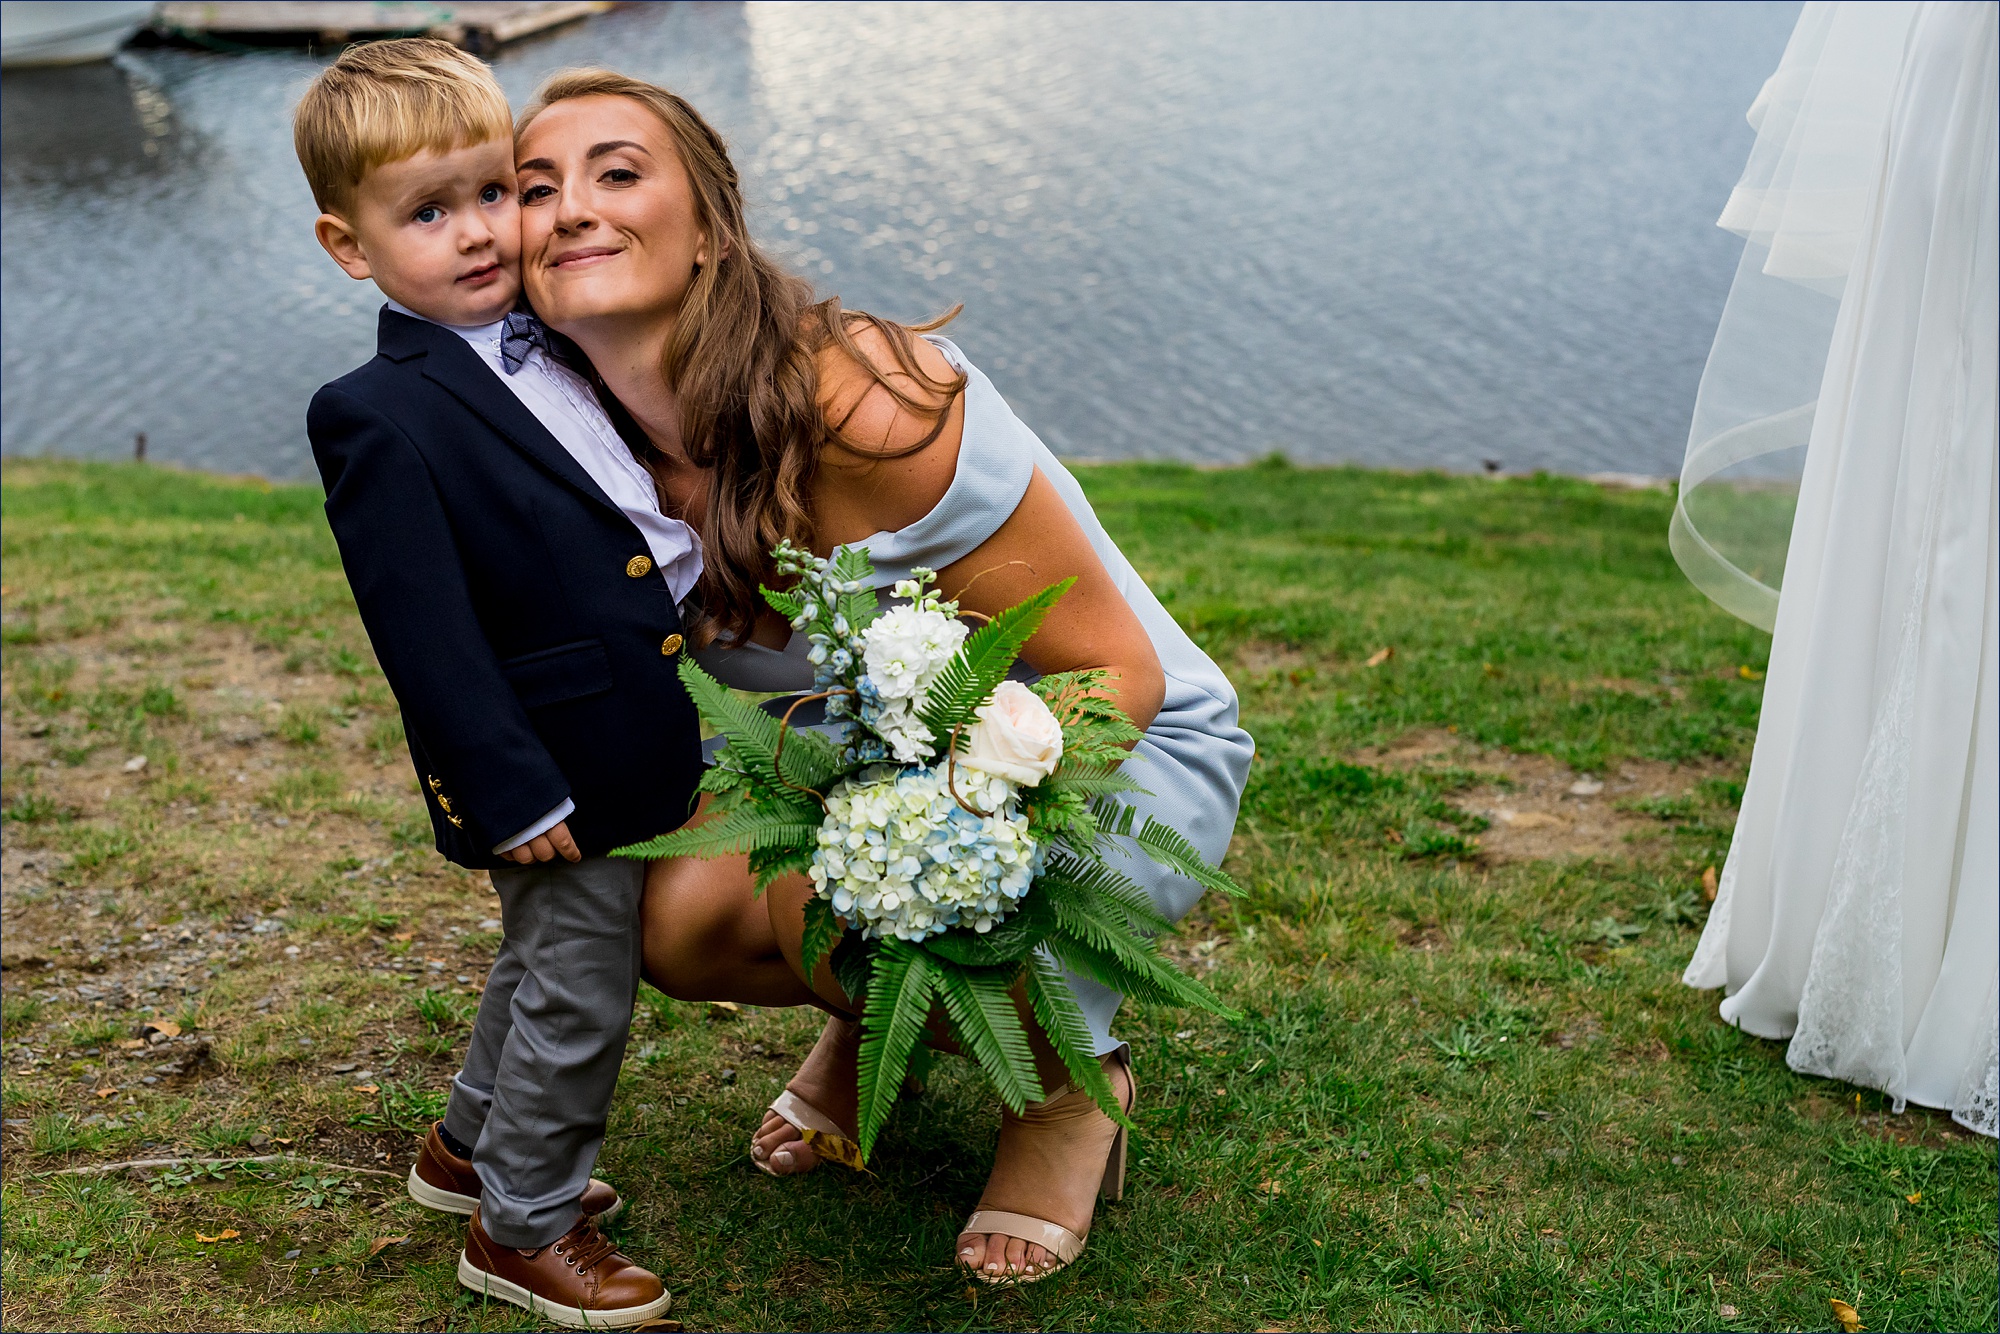 A bridesmaid tries to get close to the bride's son but he isn't too thrilled